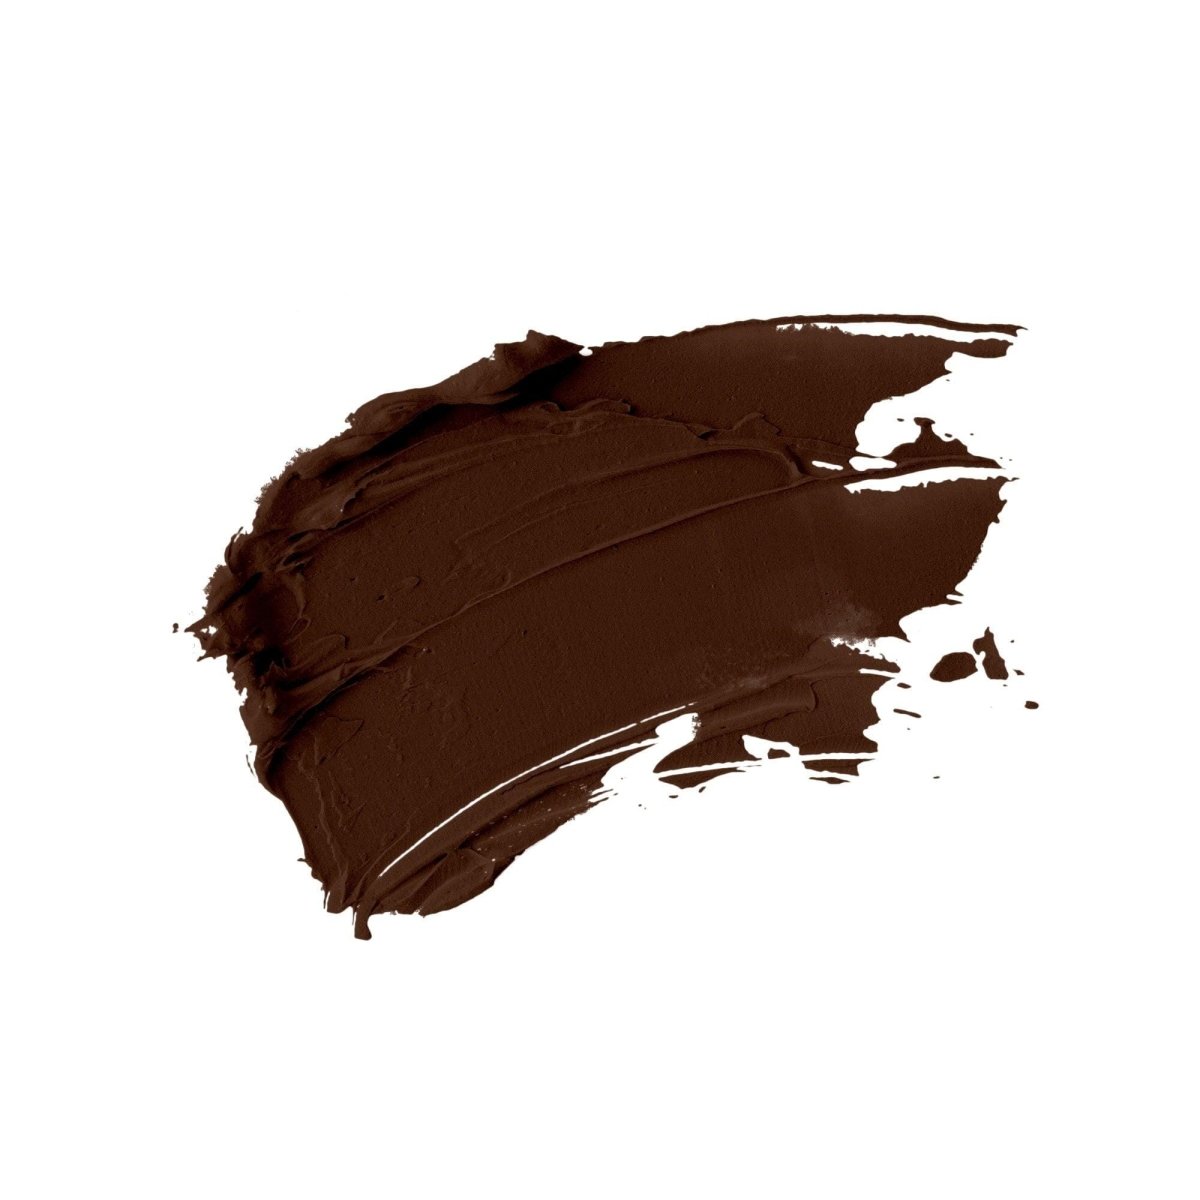 swatch of Cocoa natural liquid foundation on a white background